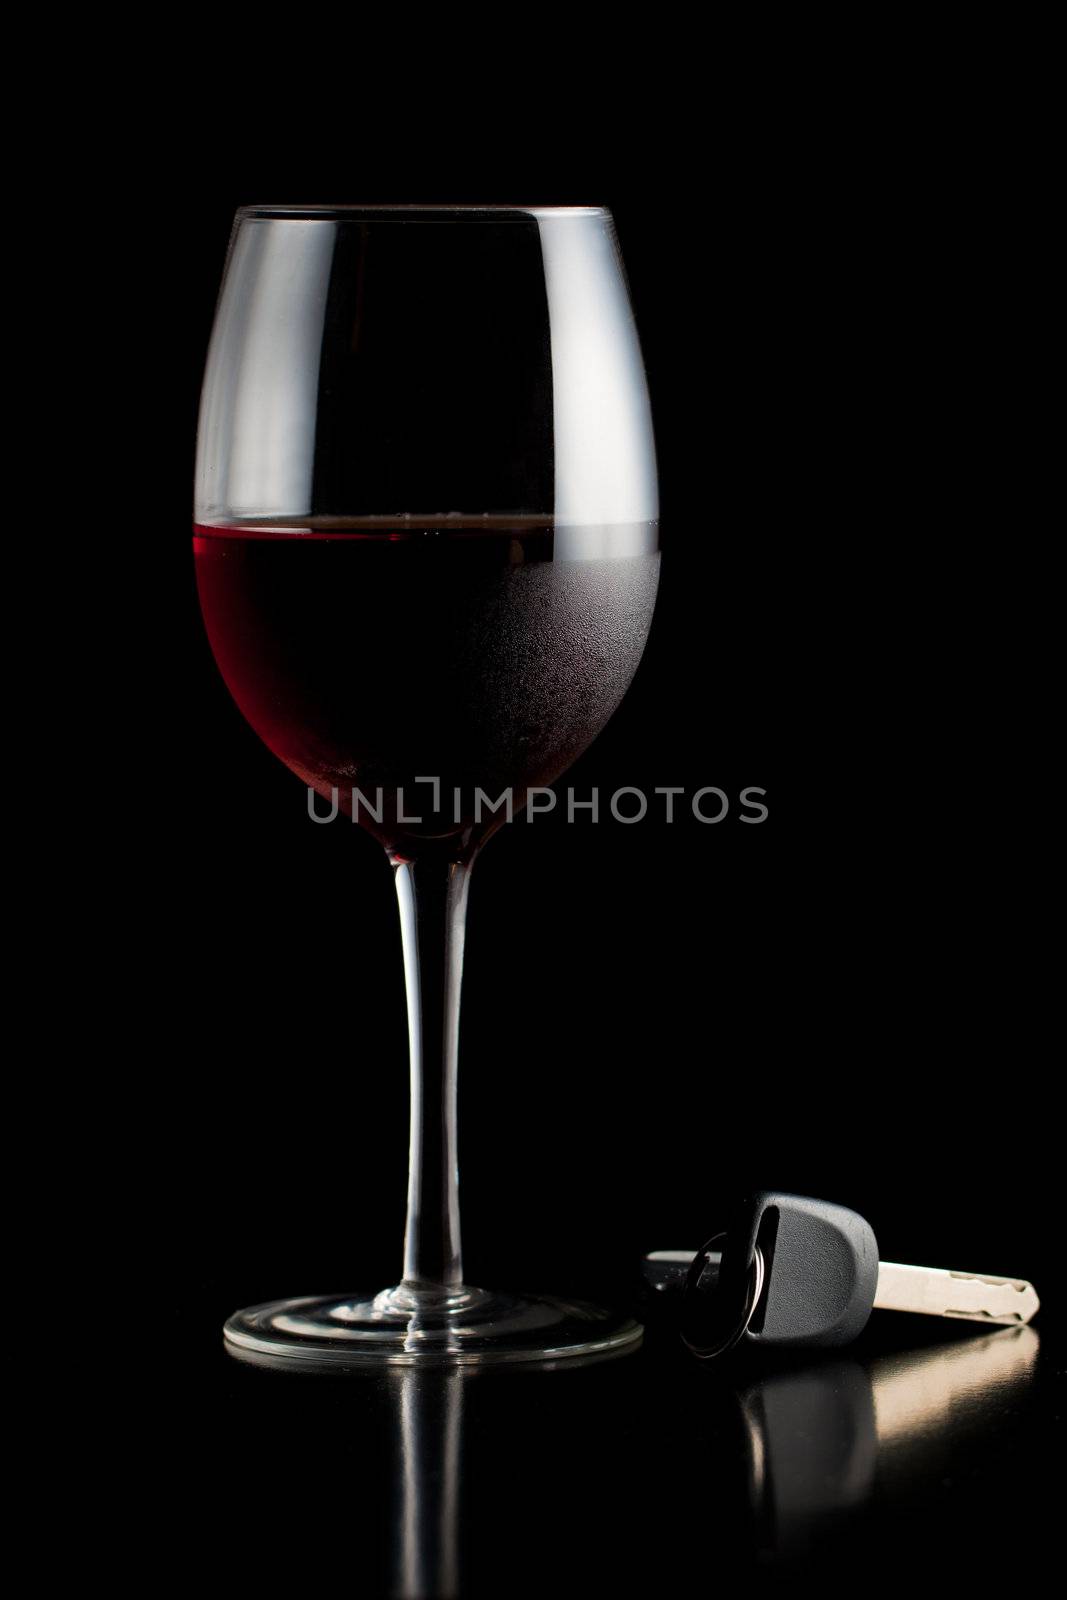 Glass of red wine and car keys on a table or bar.